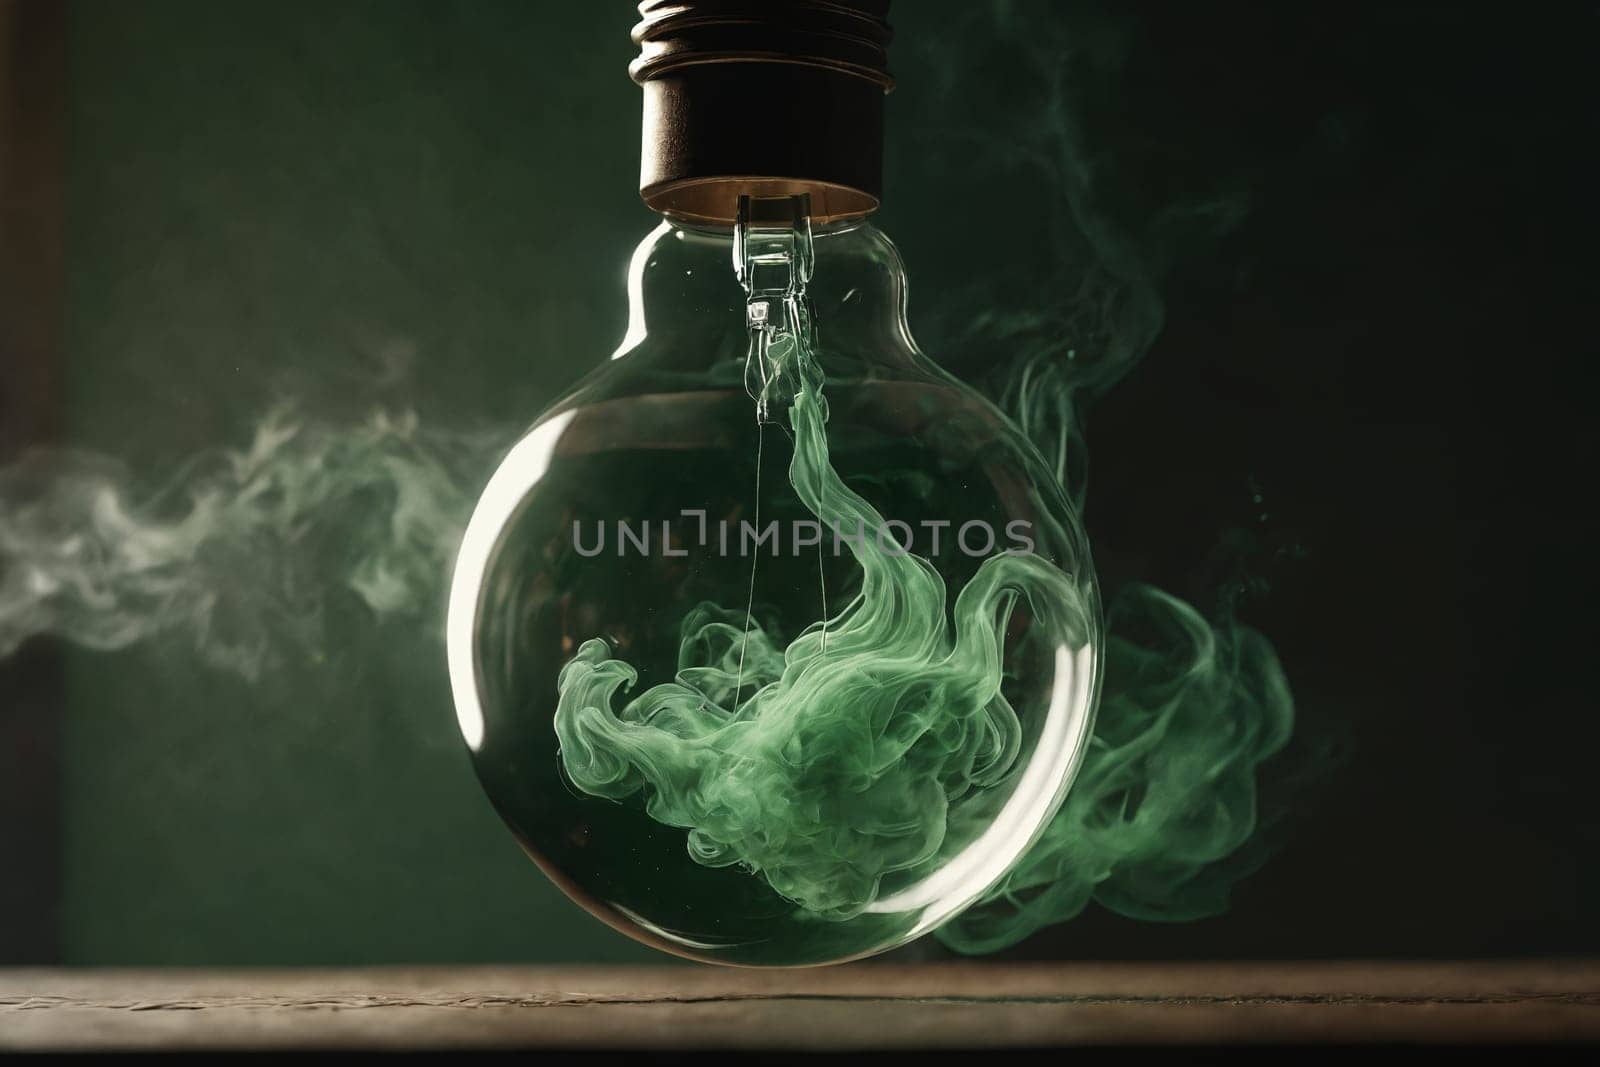 This image captures a floating light bulb with green smoke inside, creating a surreal scene of levitating beauty.